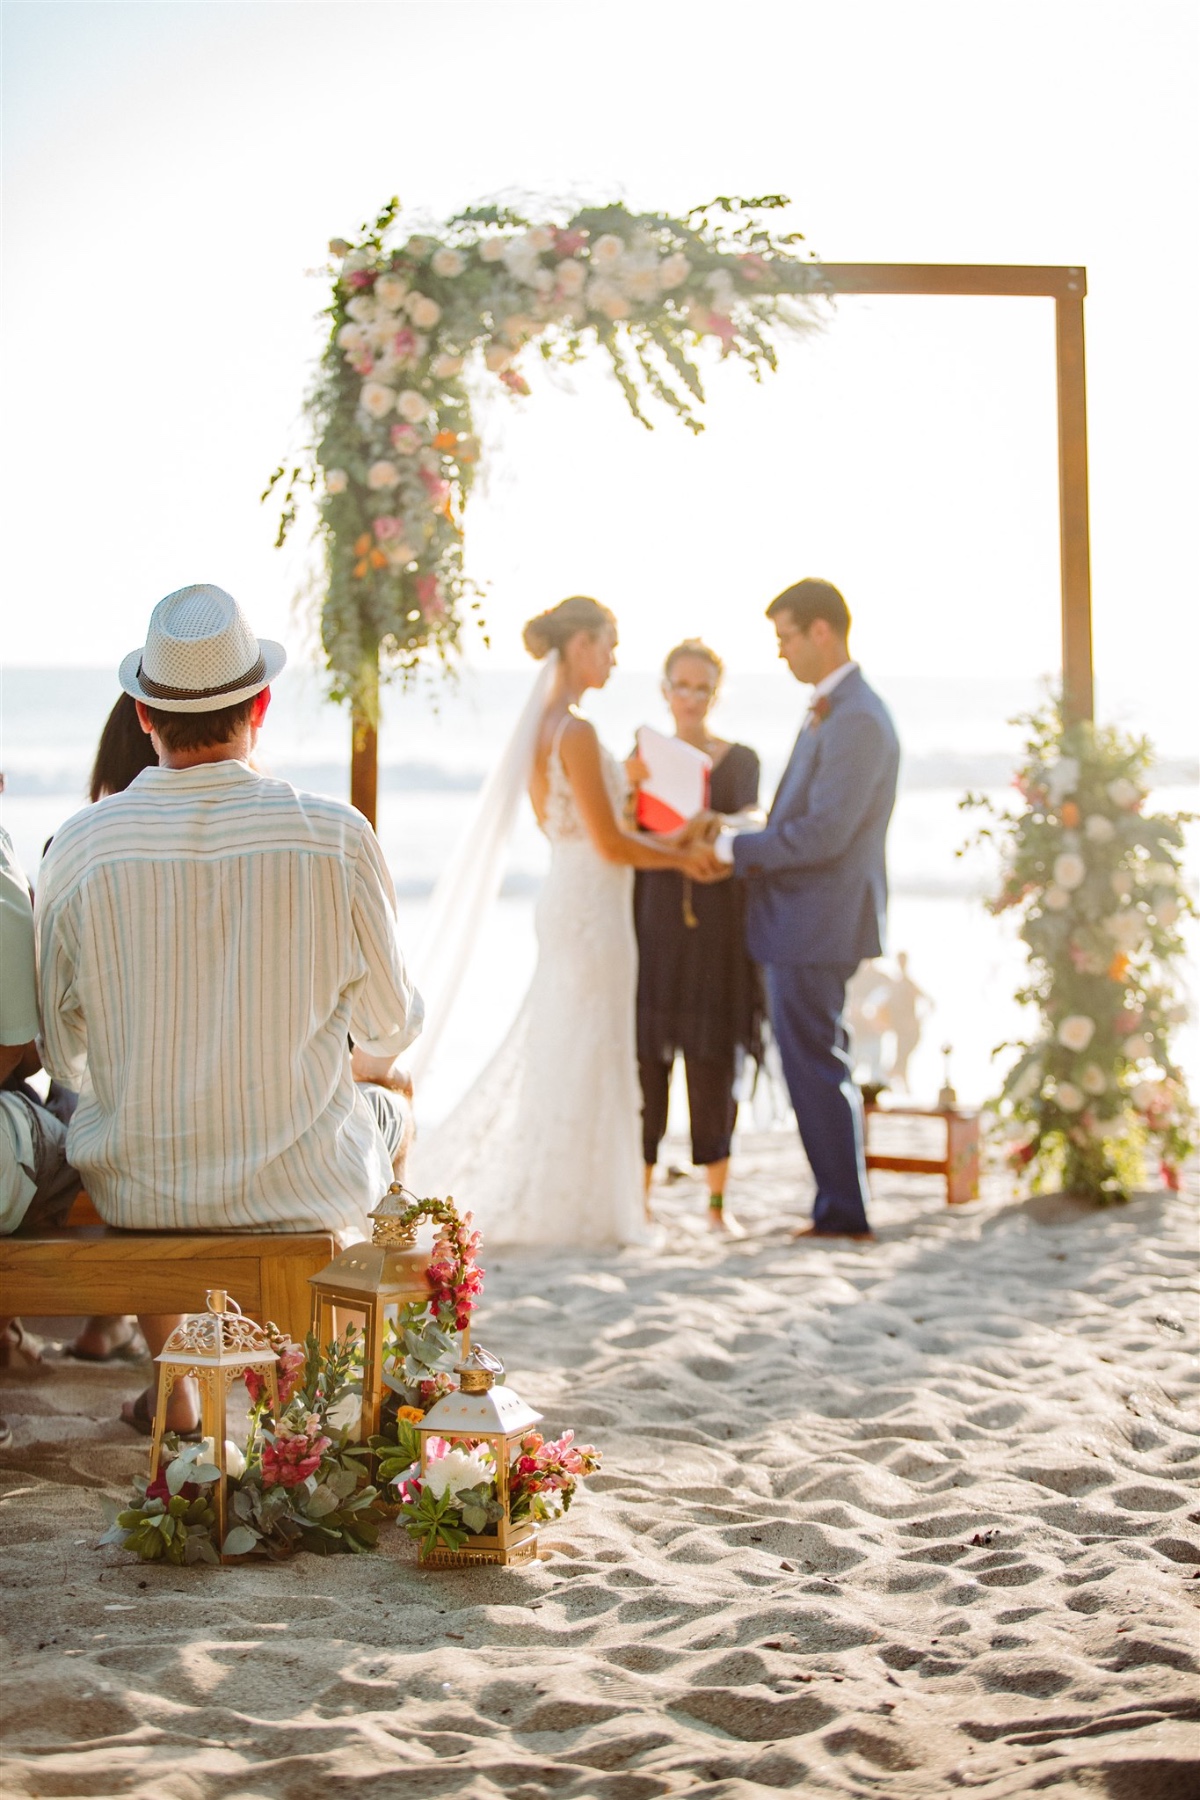 This Costa Rican Wedding Under the Palms Makes Us All Want to Lean Into That 'Pura Vida' Life